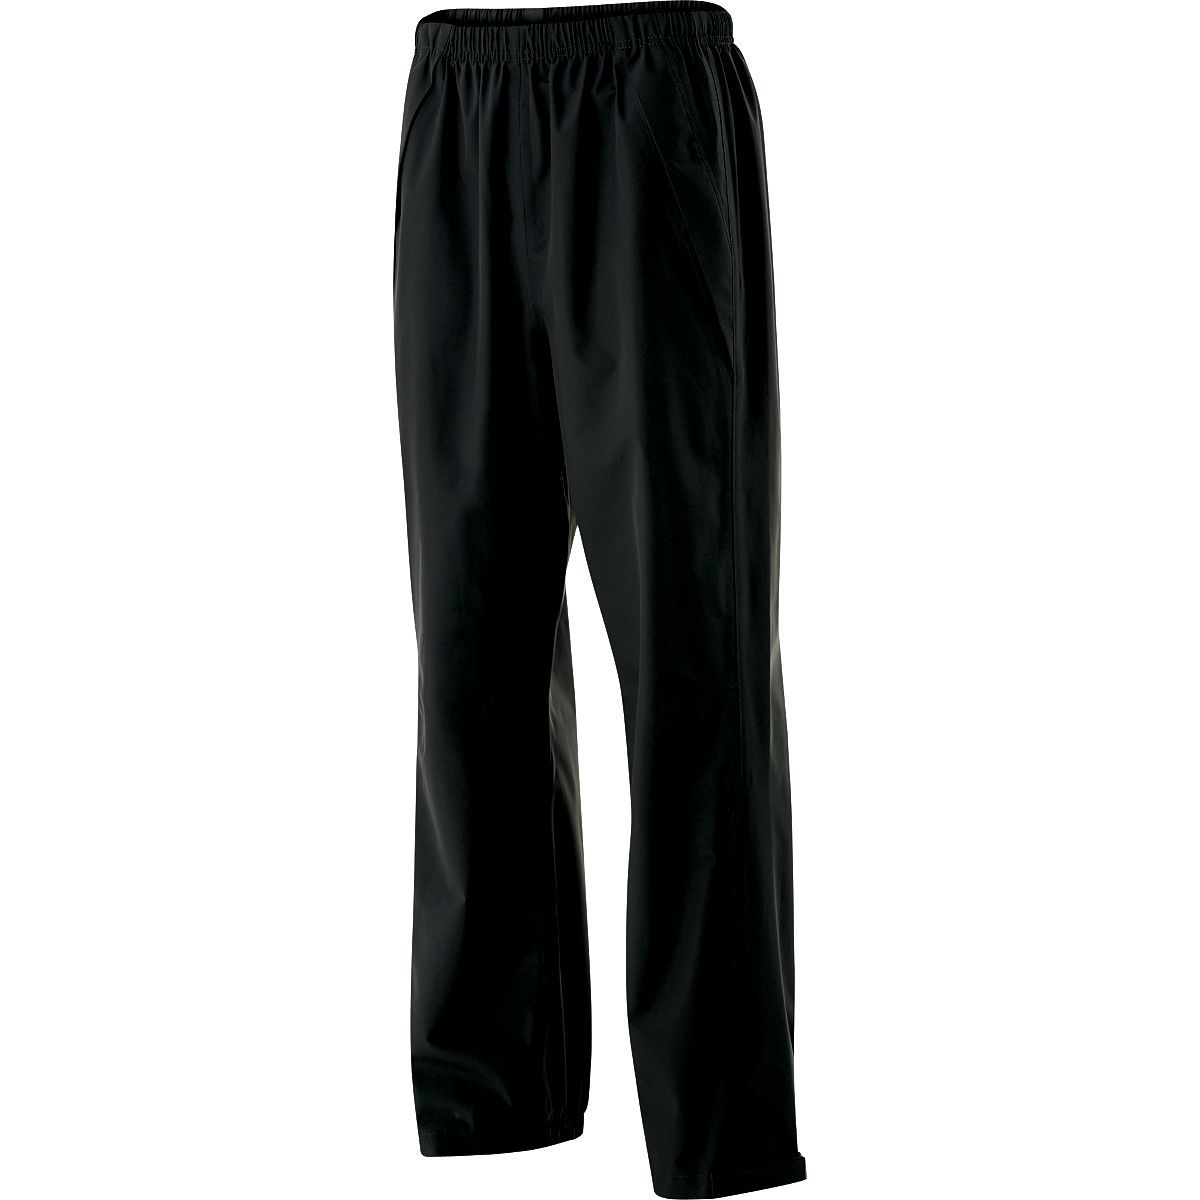 Holloway Circulate Pant in Black  -Part of the Adult, Adult-Pants, Pants, Holloway product lines at KanaleyCreations.com